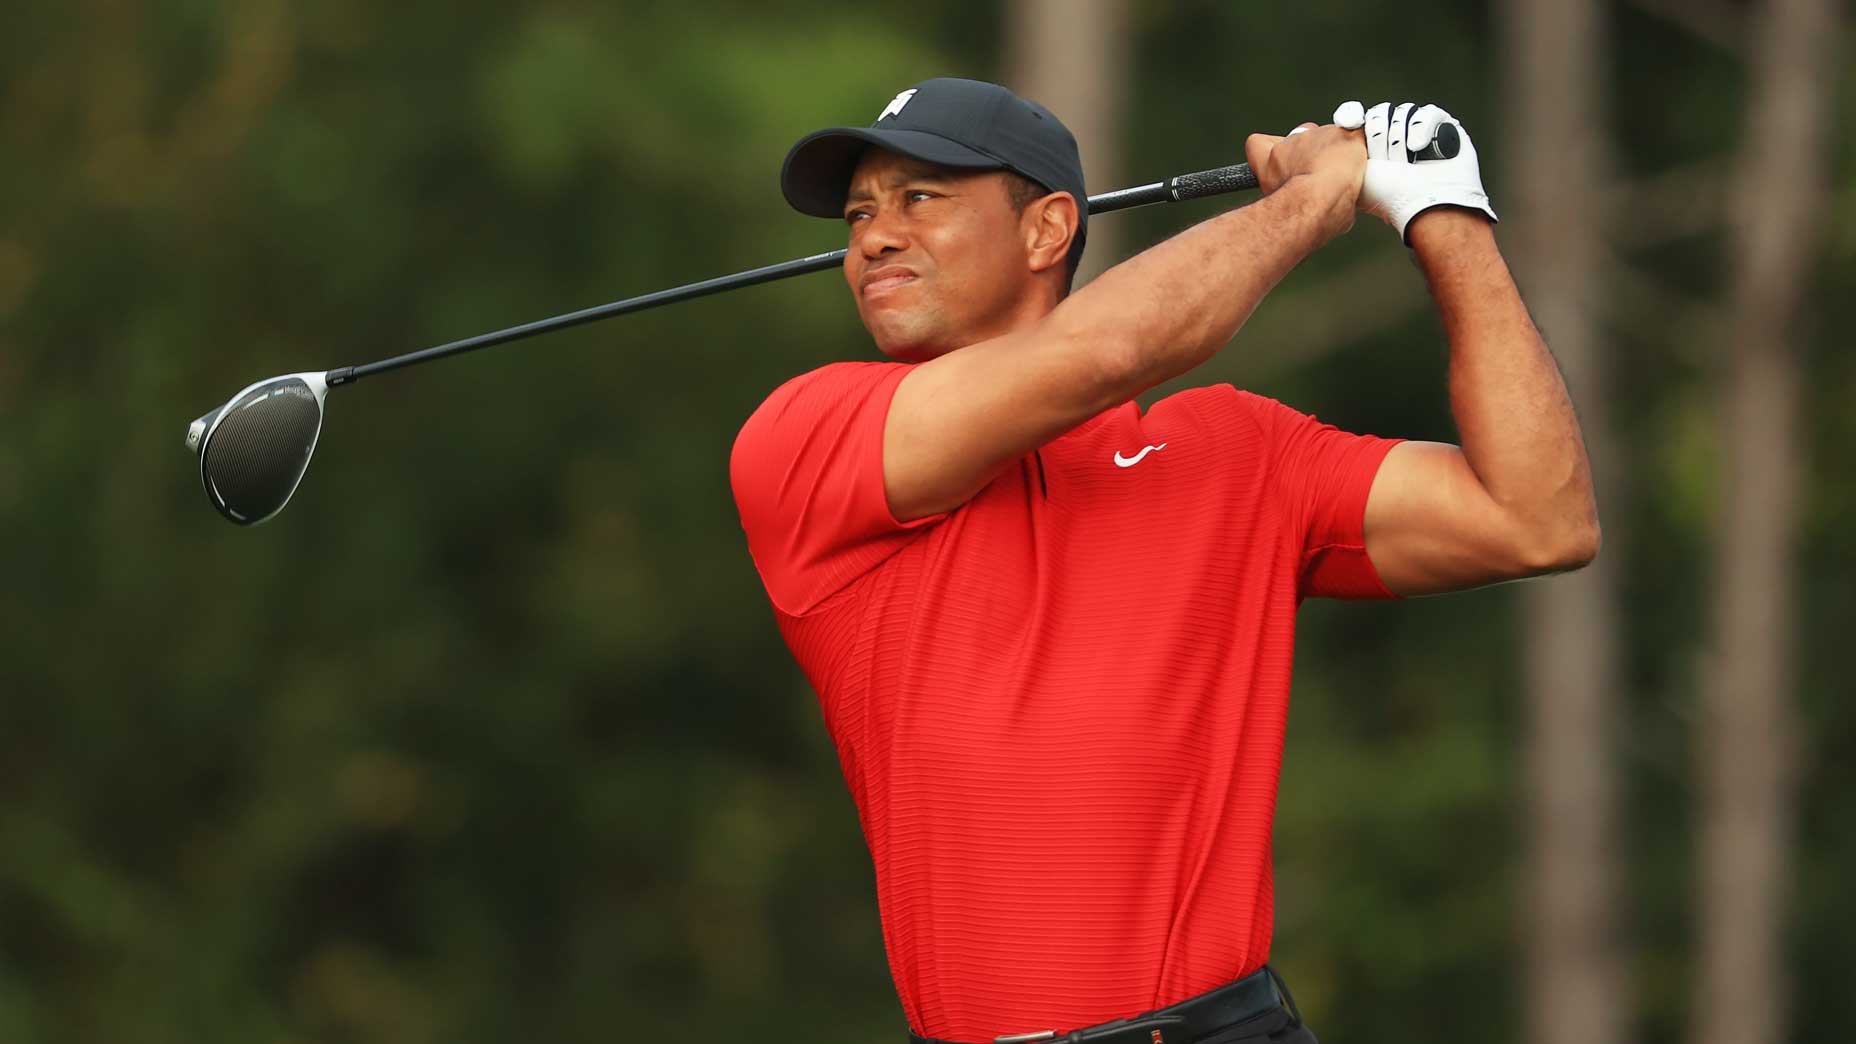 Tiger Woods has another back surgery